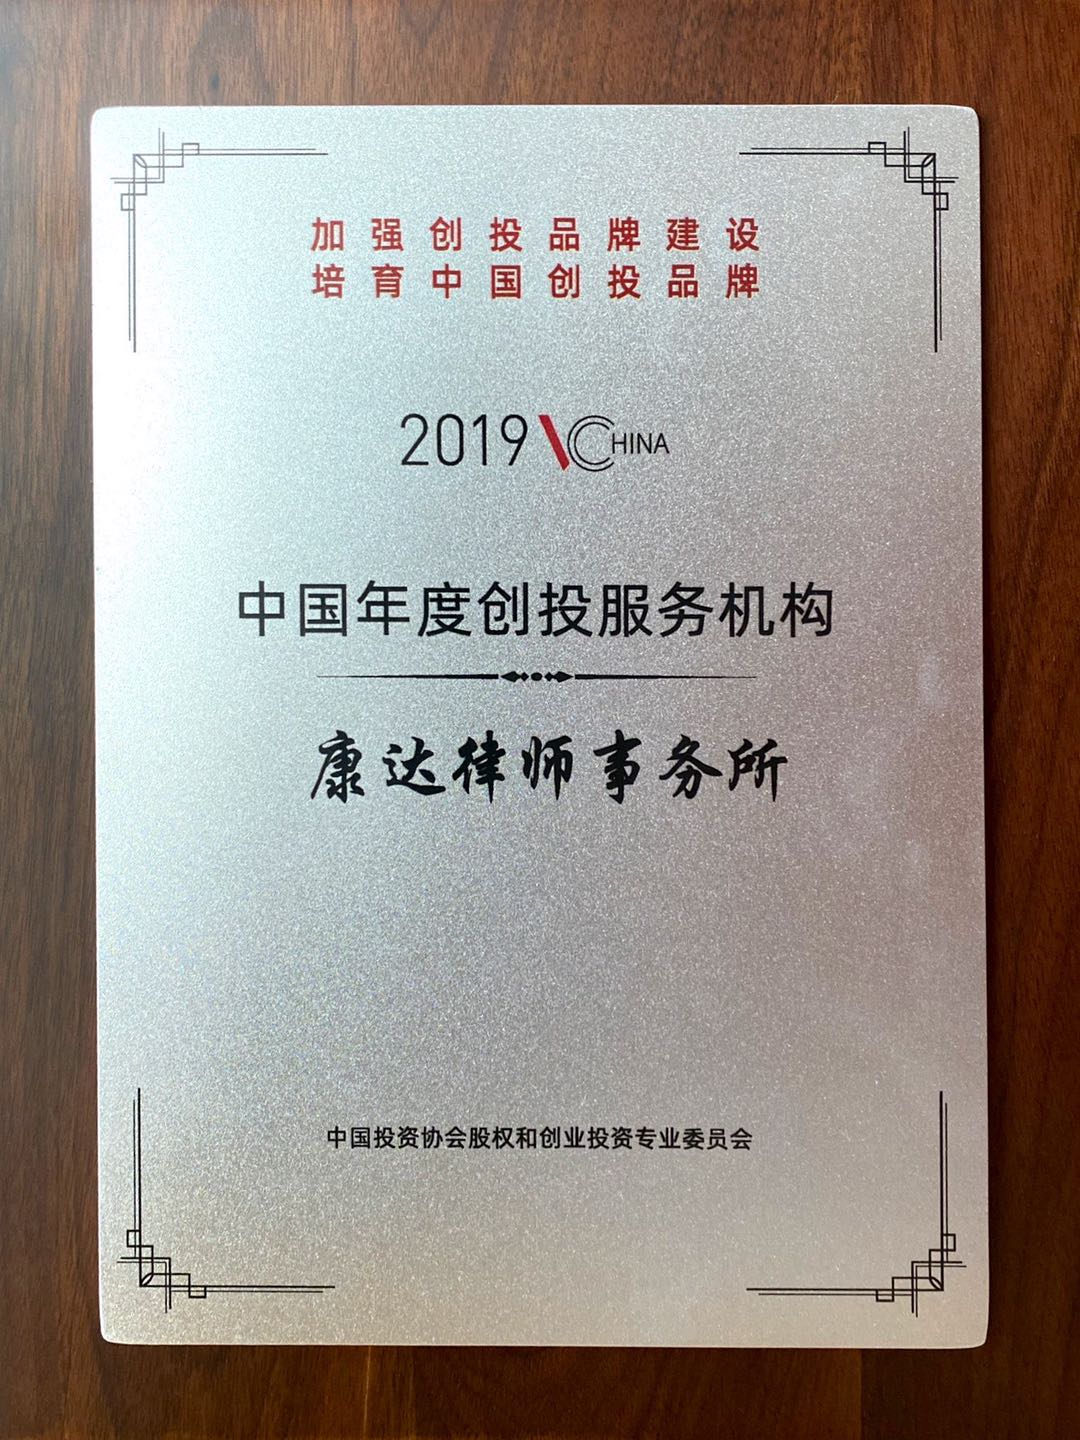 Equity and venture capital committee of China Investment Association